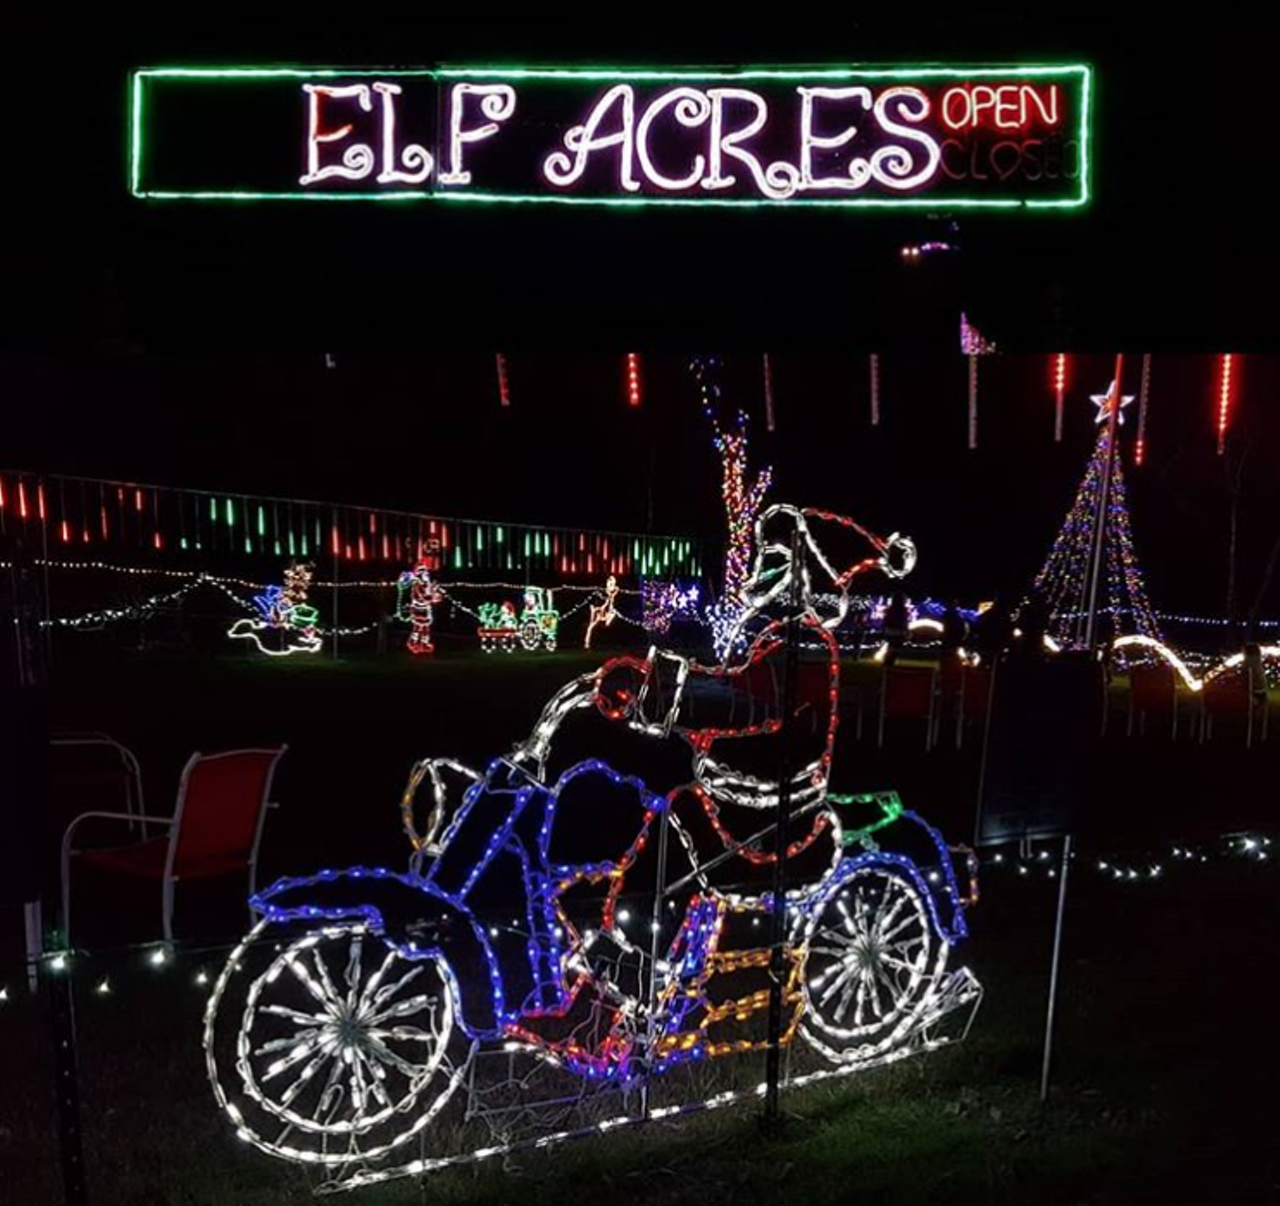 Elf Acres
1475 Grosenbacher Road, elfacres.com
Whether you choose to drive through the 15-acre trail or walk around to explore the seasonal offerings, there’s plenty fun to be had at this Far West Side spot. With thousands of Christmas lights that are animated and set to music that plays along. Be sure to hit up the concession stand for hot chocolate, popcorn, funnel cakes, and more.
Photo via Instagram / elfacresvenue